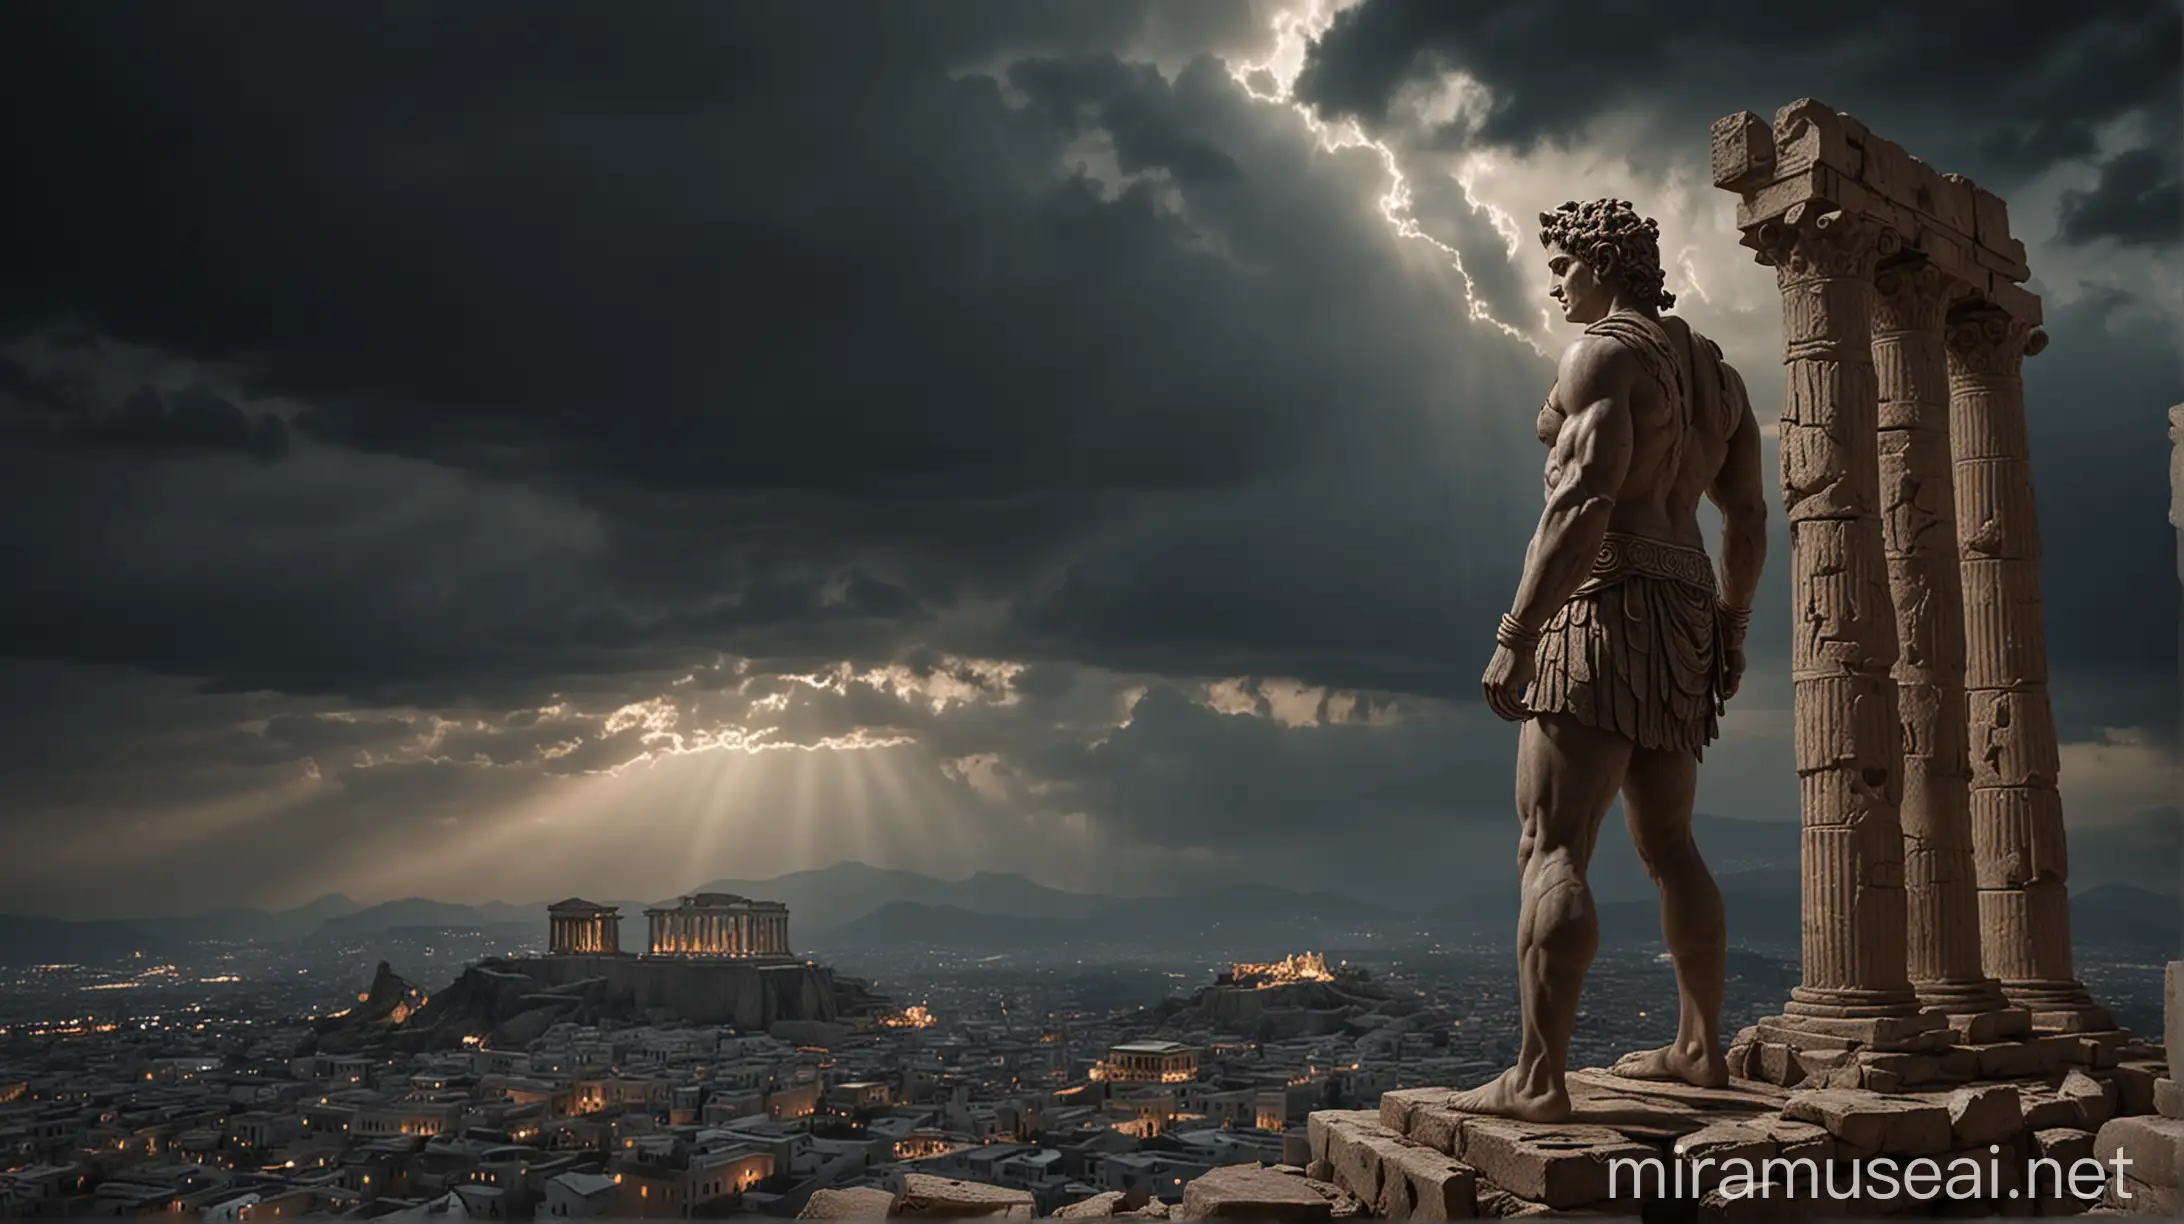 Dramatic Ancient Greek Warrior Statue on Ruined Temple Overlooking City at Night